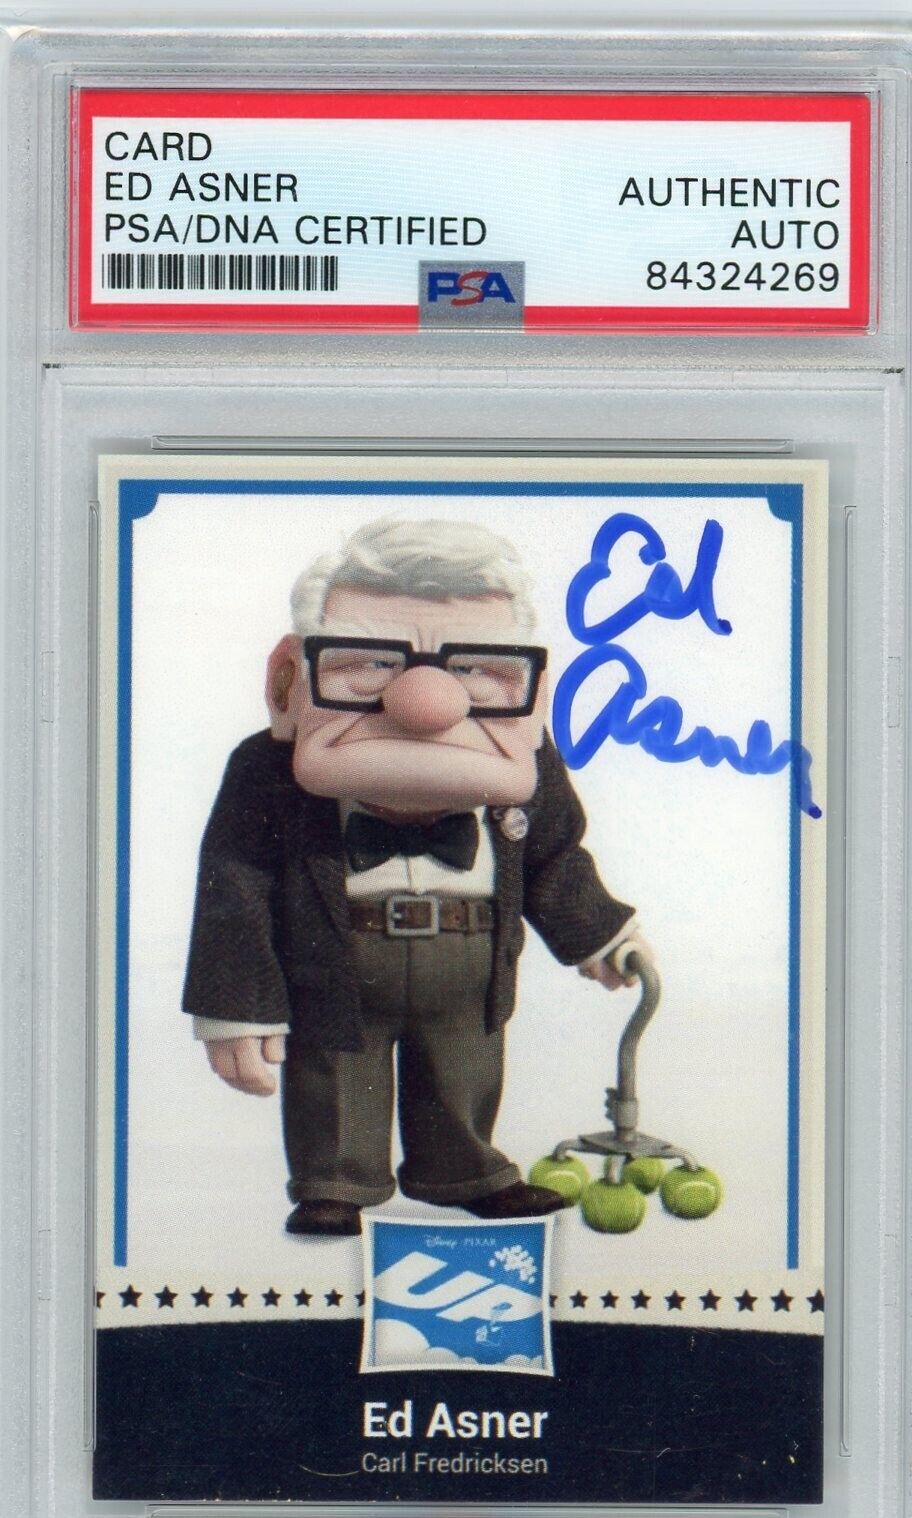 ED ASNER VOICE OF Carl Fredricksen in Disneys UP Autographed Card PSA Authentic